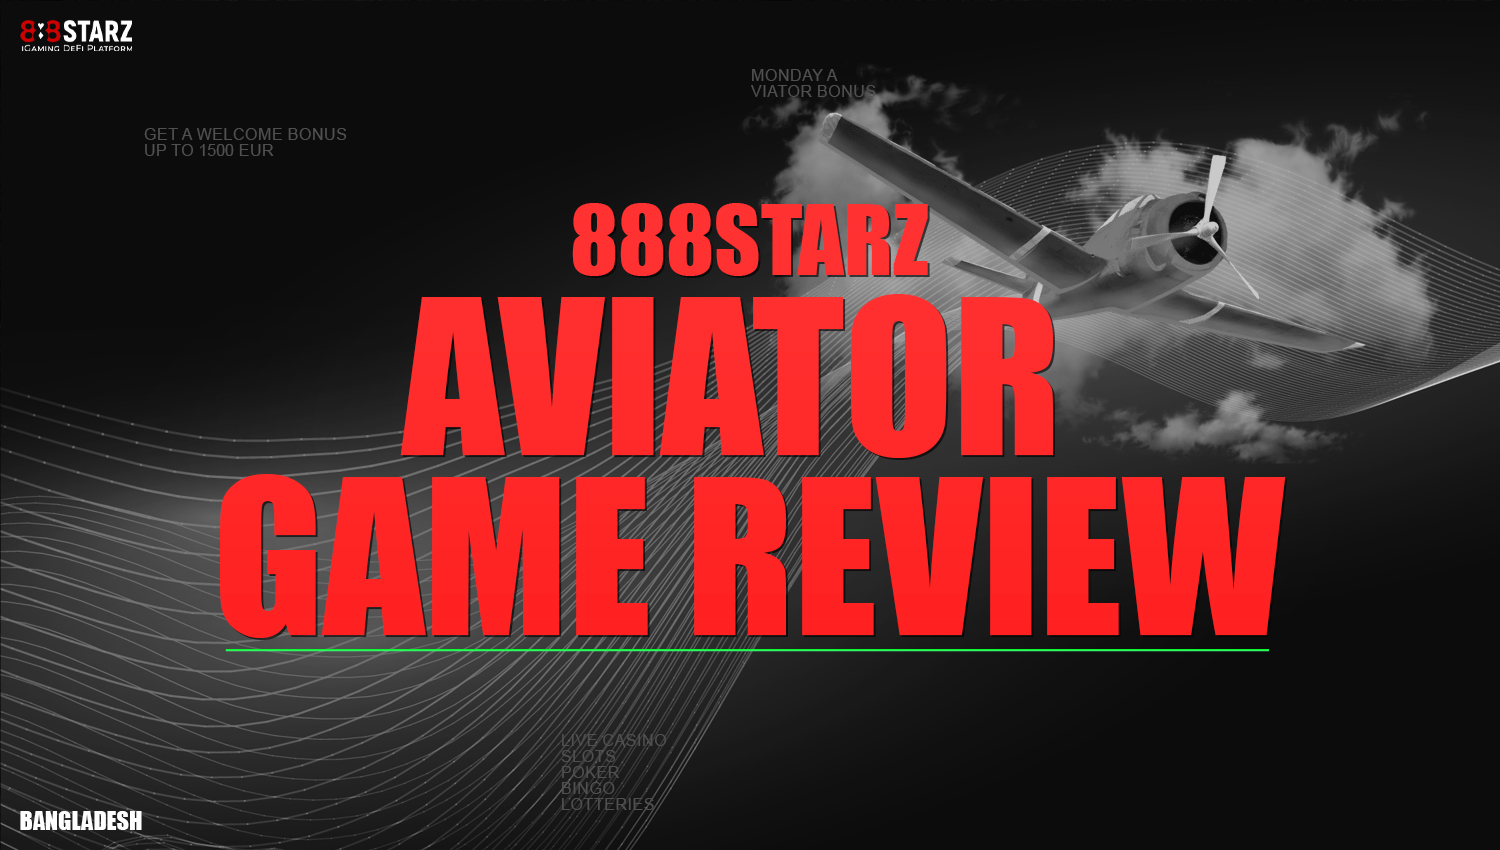 Aviator online game review at 888starz